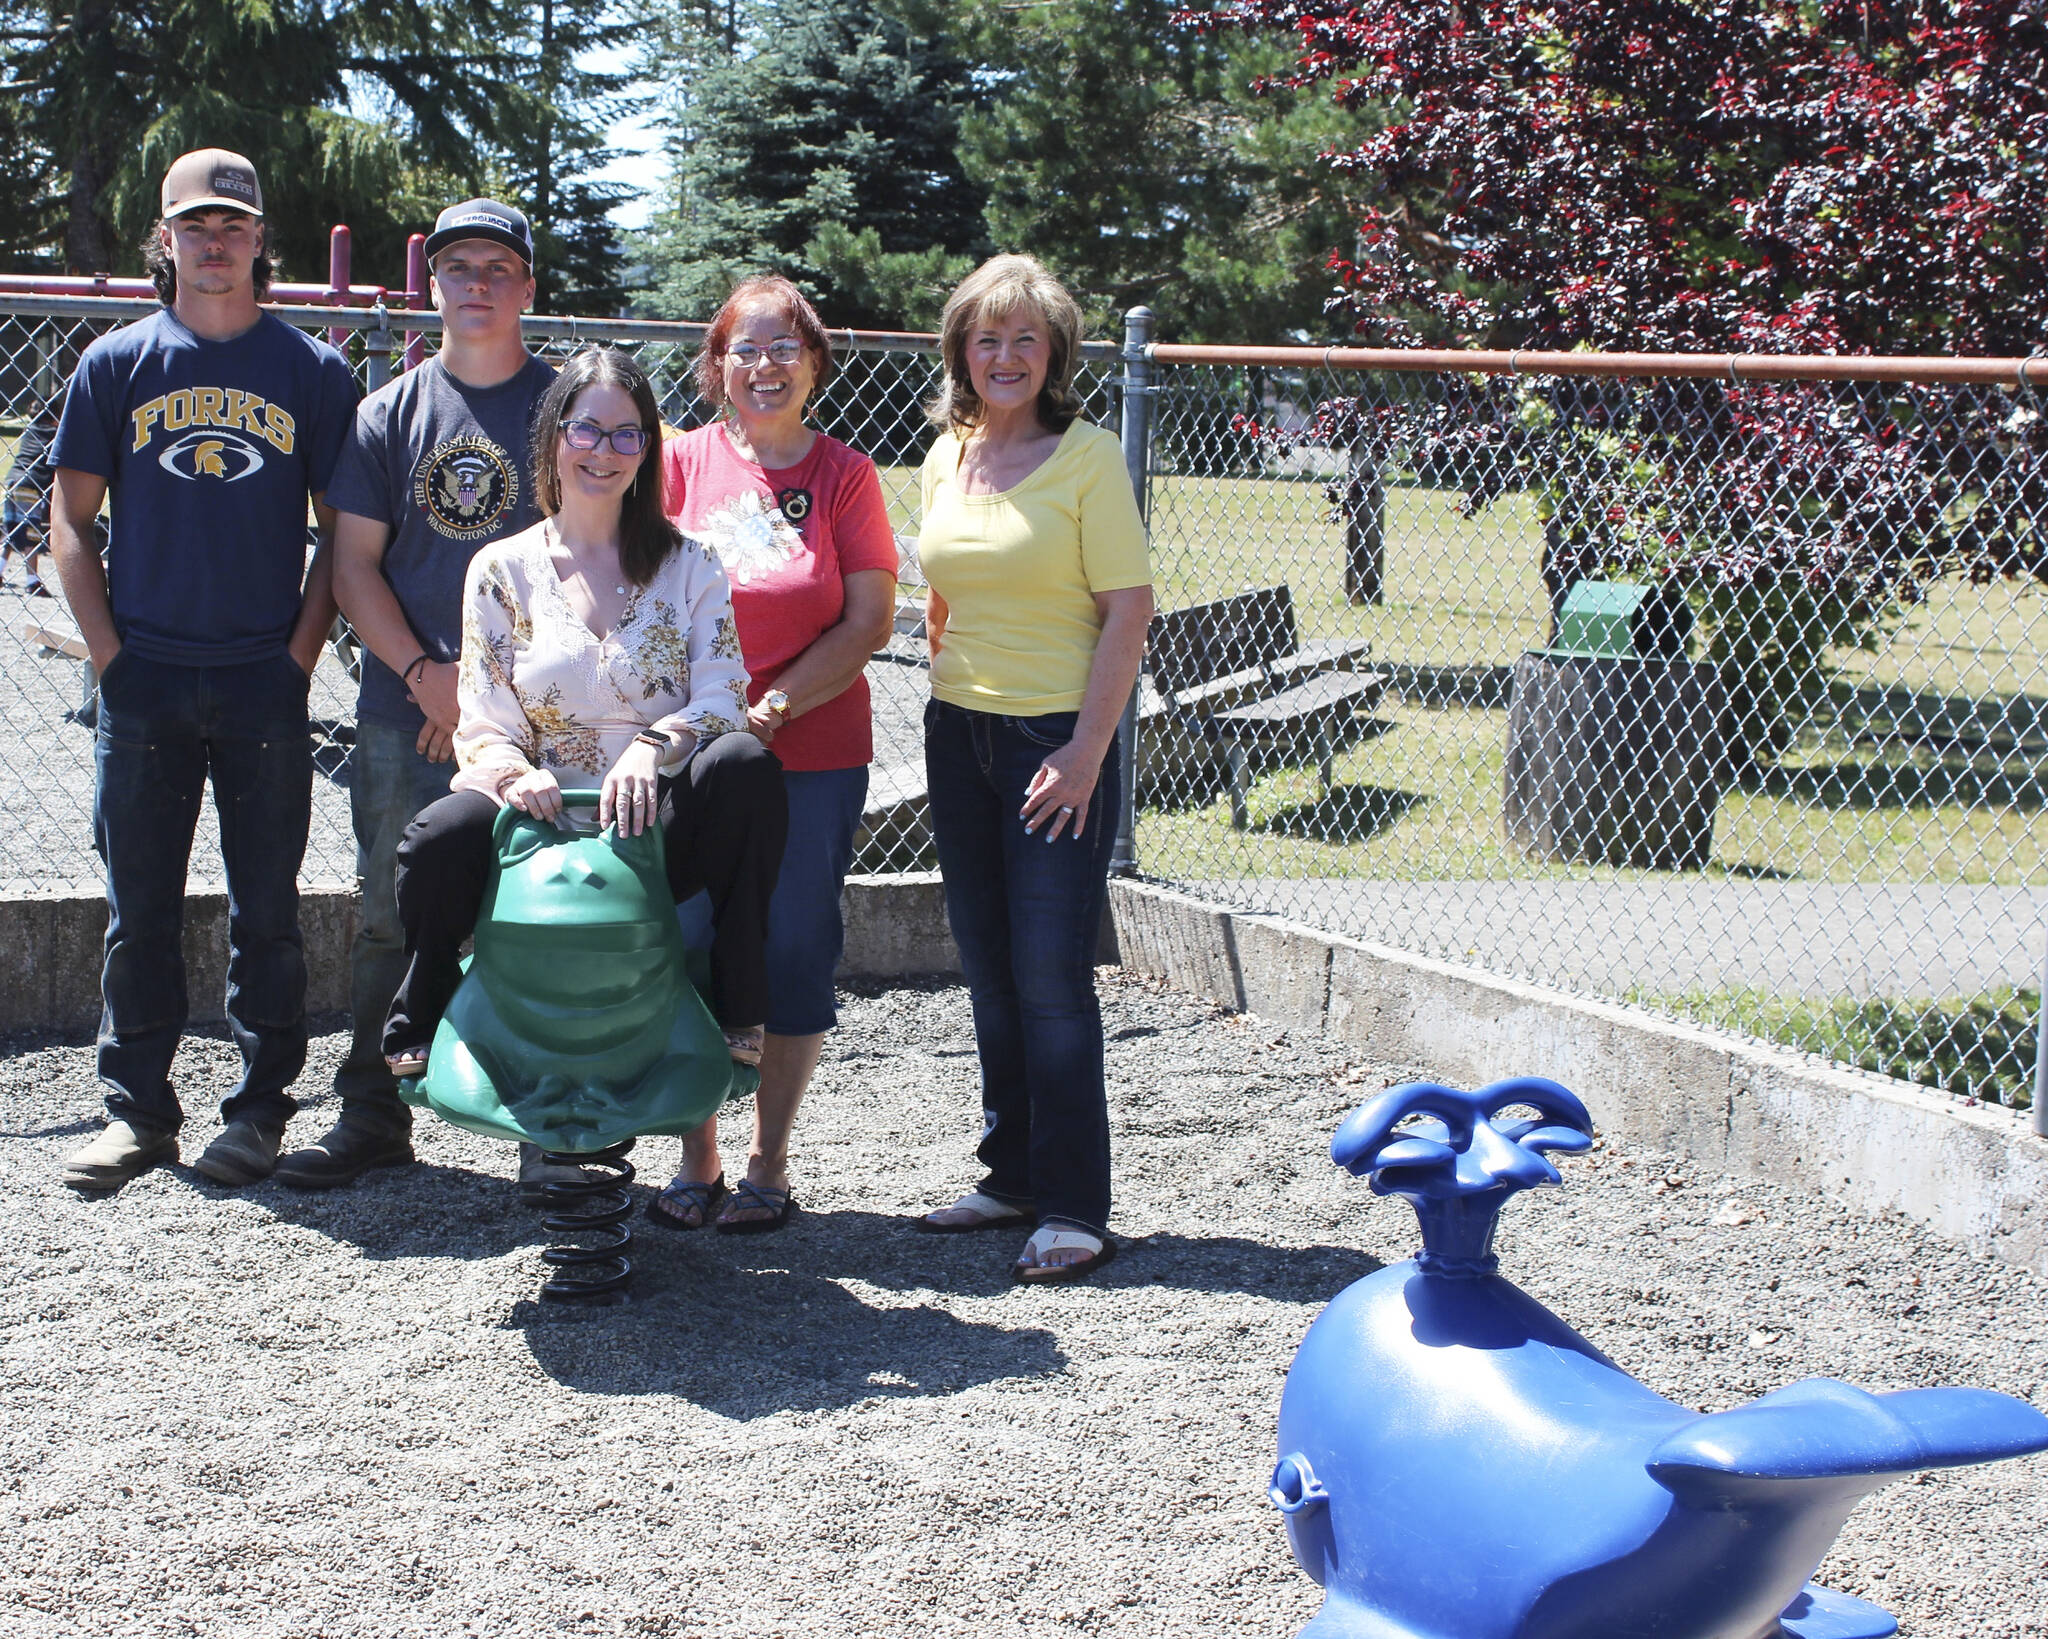 Above, Soroptimist International of the Olympic Rainforest Economic and Social Development Committee members Sarah Hanson (trying out the new frog), Sharla Fraker, and Elena Friesz (standing behind) with City of Forks Public Works employees (summer crew) Landin Davis and Kaleb Blanton. Not pictured are Public Works employees Mike, Brett and Ryan who were going to do the photo but had a concrete truck arrive at the same time! Photo Christi Baron